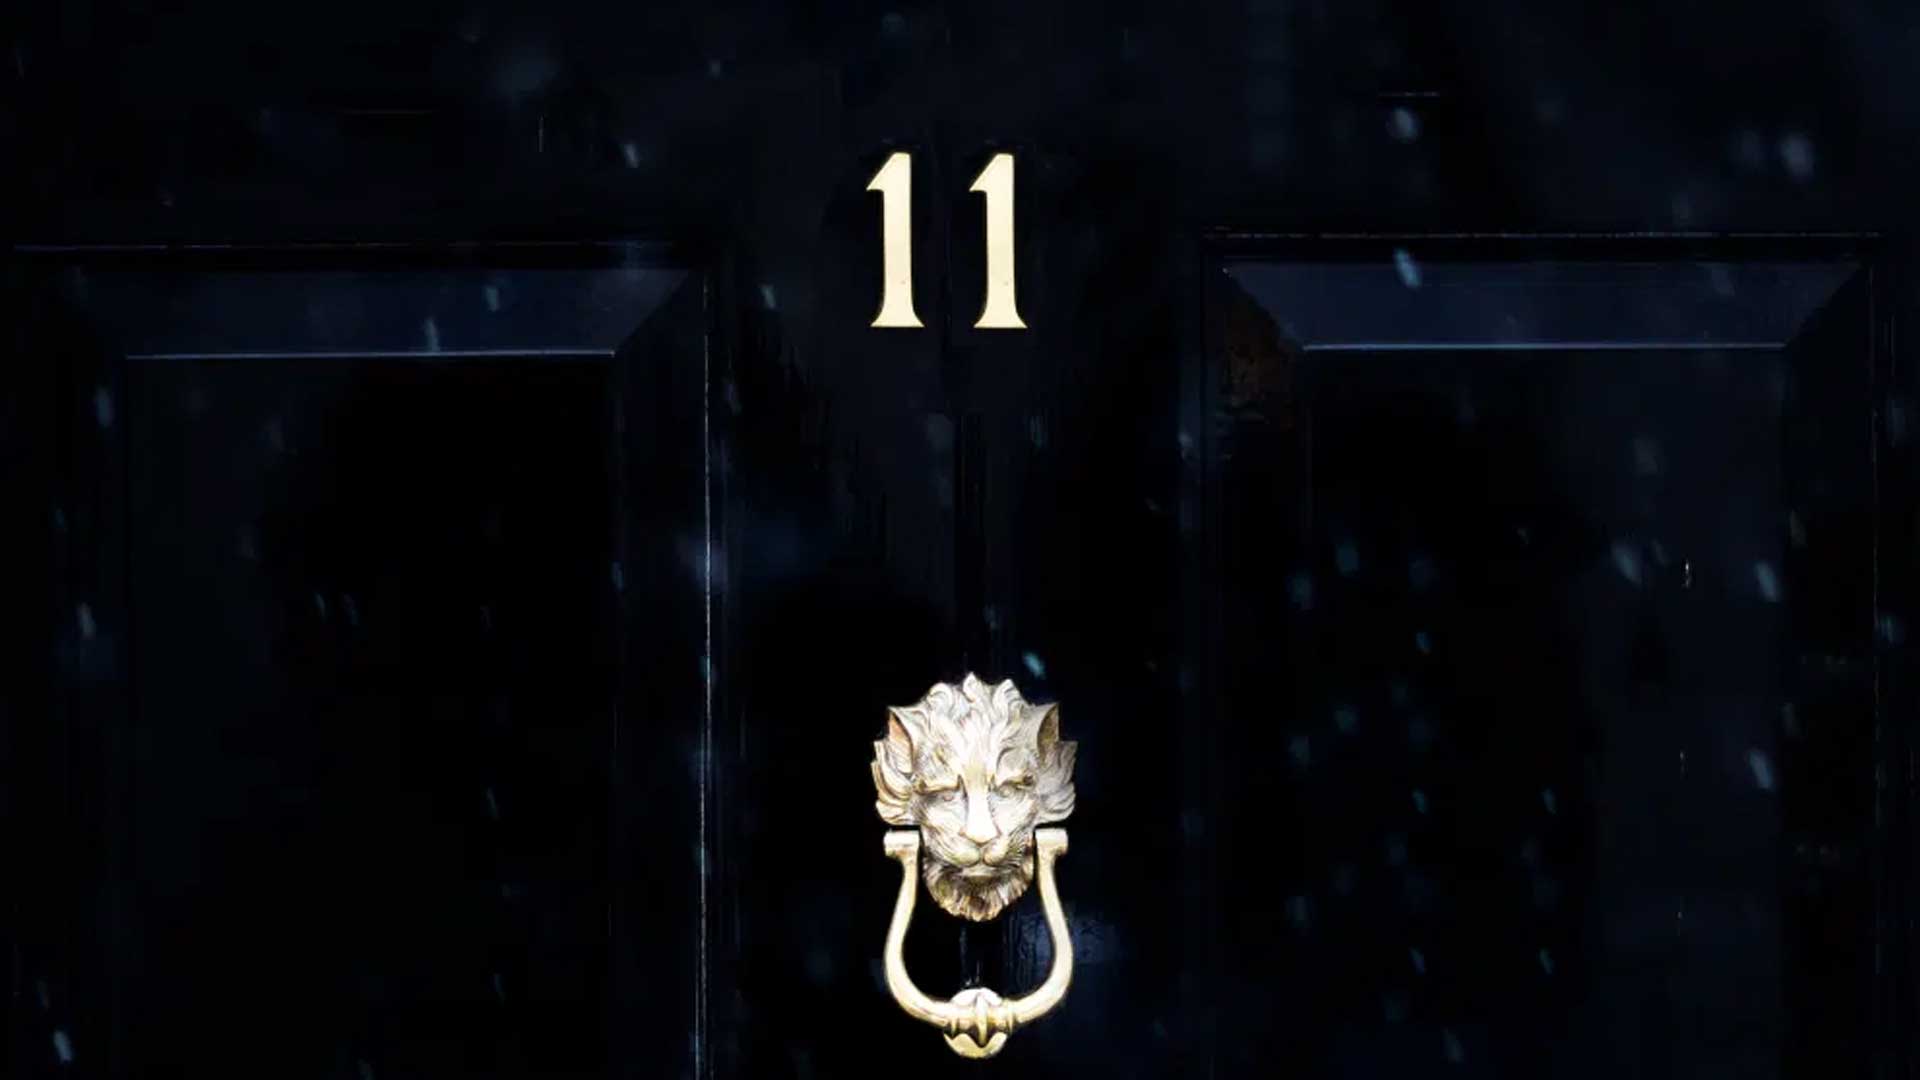 A door with 11 and a knocker